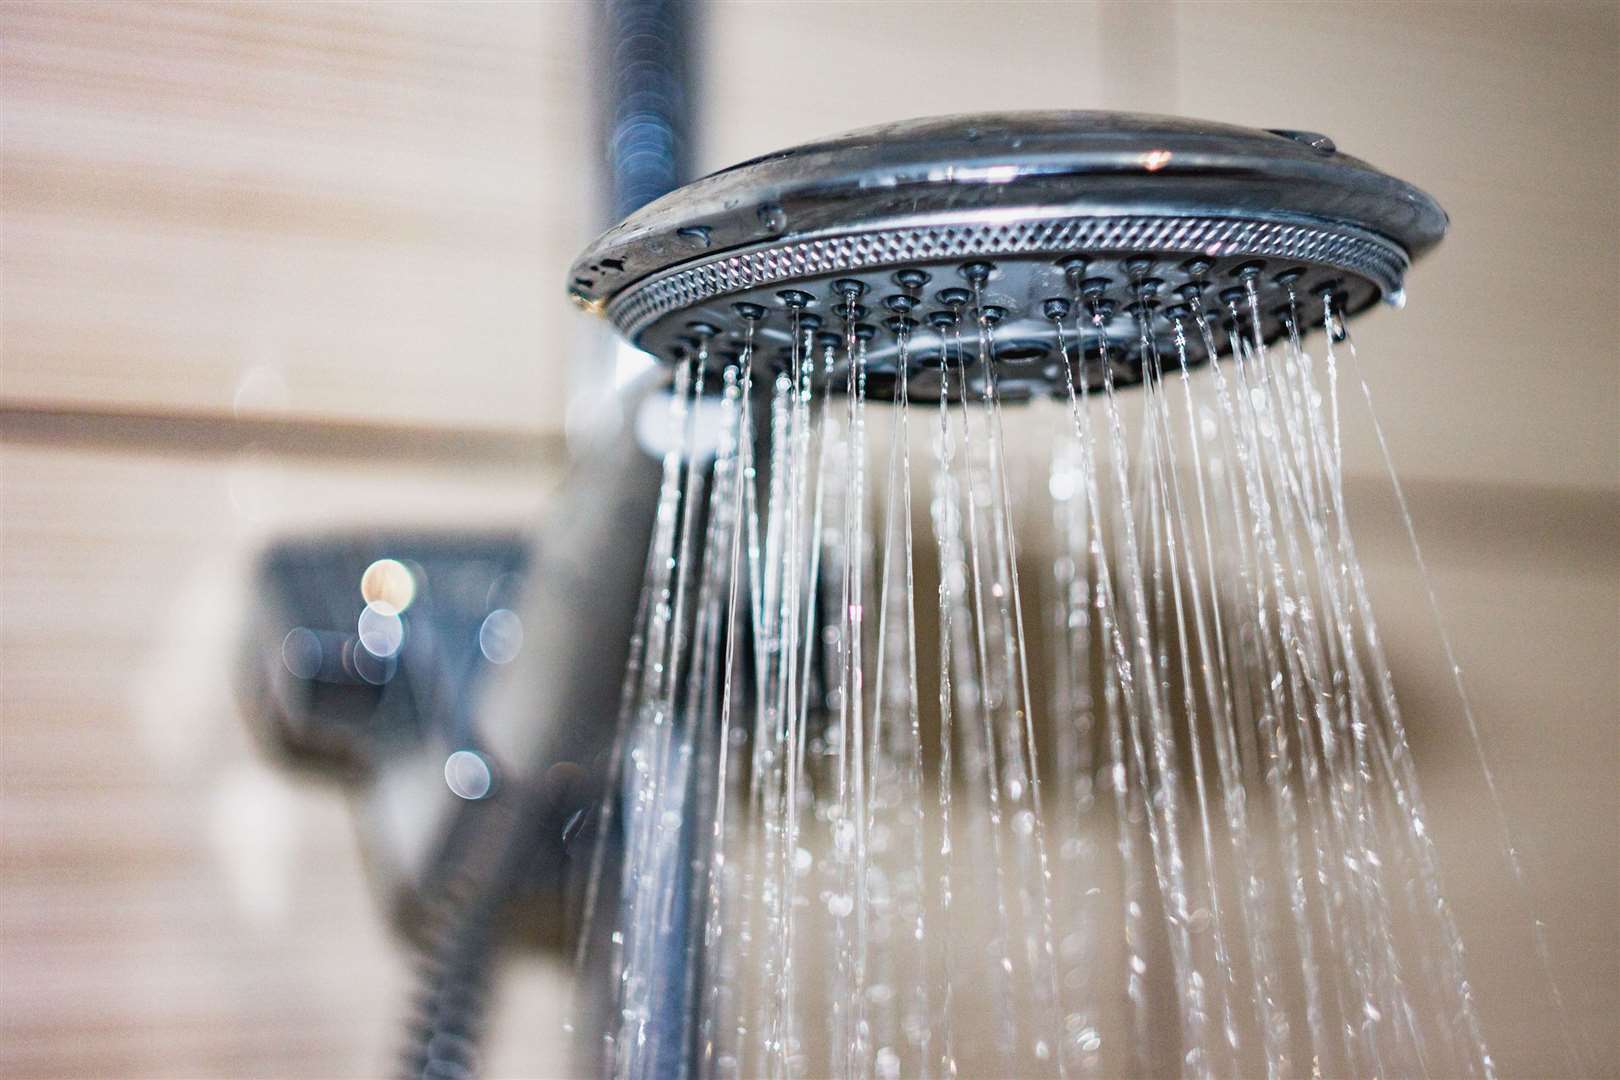 Cut down the amount of time spent on each occasion in the shower